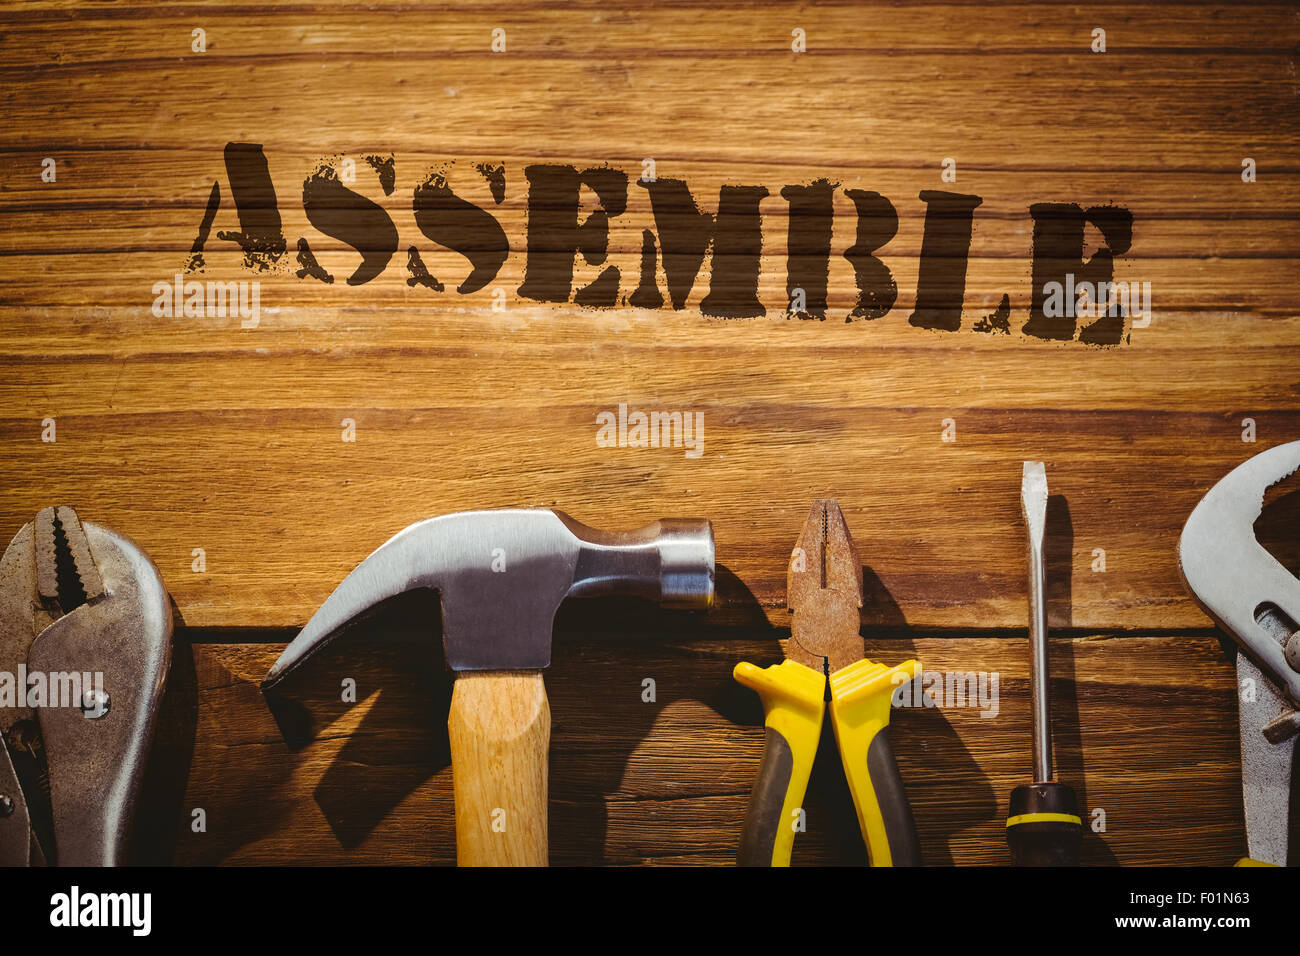 Assemble against desk with tools Stock Photo